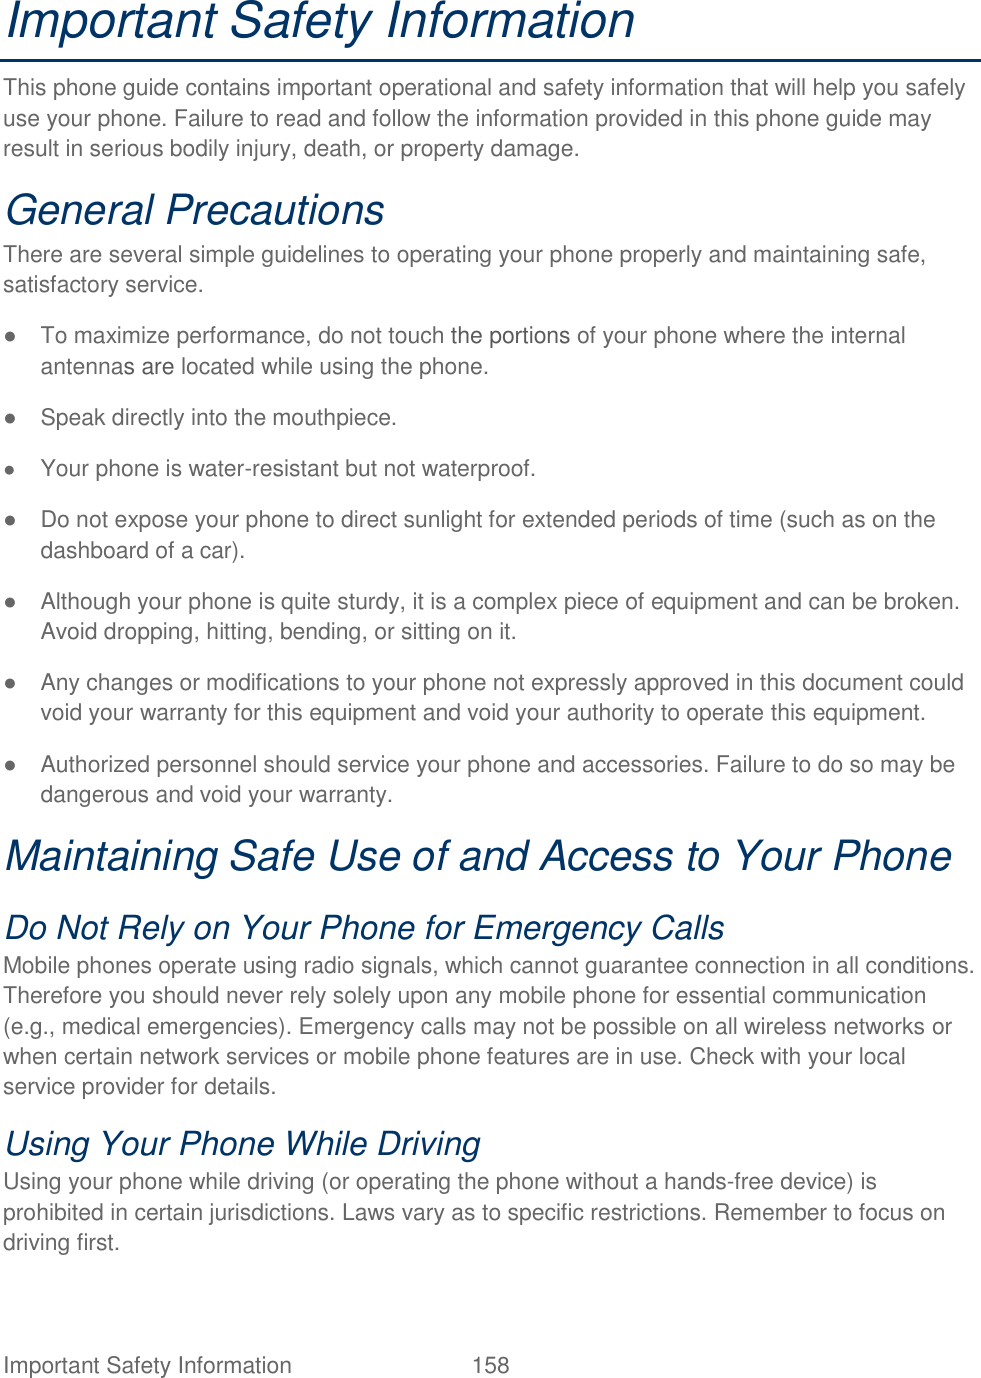  Important Safety Information  158   Important Safety Information   This phone guide contains important operational and safety information that will help you safely use your phone. Failure to read and follow the information provided in this phone guide may result in serious bodily injury, death, or property damage.   General Precautions   There are several simple guidelines to operating your phone properly and maintaining safe, satisfactory service.   ●  To maximize performance, do not touch the portions of your phone where the internal antennas are located while using the phone.   ●  Speak directly into the mouthpiece.   ● Your phone is water-resistant but not waterproof. ●  Do not expose your phone to direct sunlight for extended periods of time (such as on the dashboard of a car).   ●  Although your phone is quite sturdy, it is a complex piece of equipment and can be broken. Avoid dropping, hitting, bending, or sitting on it.   ●  Any changes or modifications to your phone not expressly approved in this document could void your warranty for this equipment and void your authority to operate this equipment.   ●  Authorized personnel should service your phone and accessories. Failure to do so may be dangerous and void your warranty.   Maintaining Safe Use of and Access to Your Phone   Do Not Rely on Your Phone for Emergency Calls   Mobile phones operate using radio signals, which cannot guarantee connection in all conditions. Therefore you should never rely solely upon any mobile phone for essential communication (e.g., medical emergencies). Emergency calls may not be possible on all wireless networks or when certain network services or mobile phone features are in use. Check with your local service provider for details.   Using Your Phone While Driving   Using your phone while driving (or operating the phone without a hands-free device) is prohibited in certain jurisdictions. Laws vary as to specific restrictions. Remember to focus on driving first.   